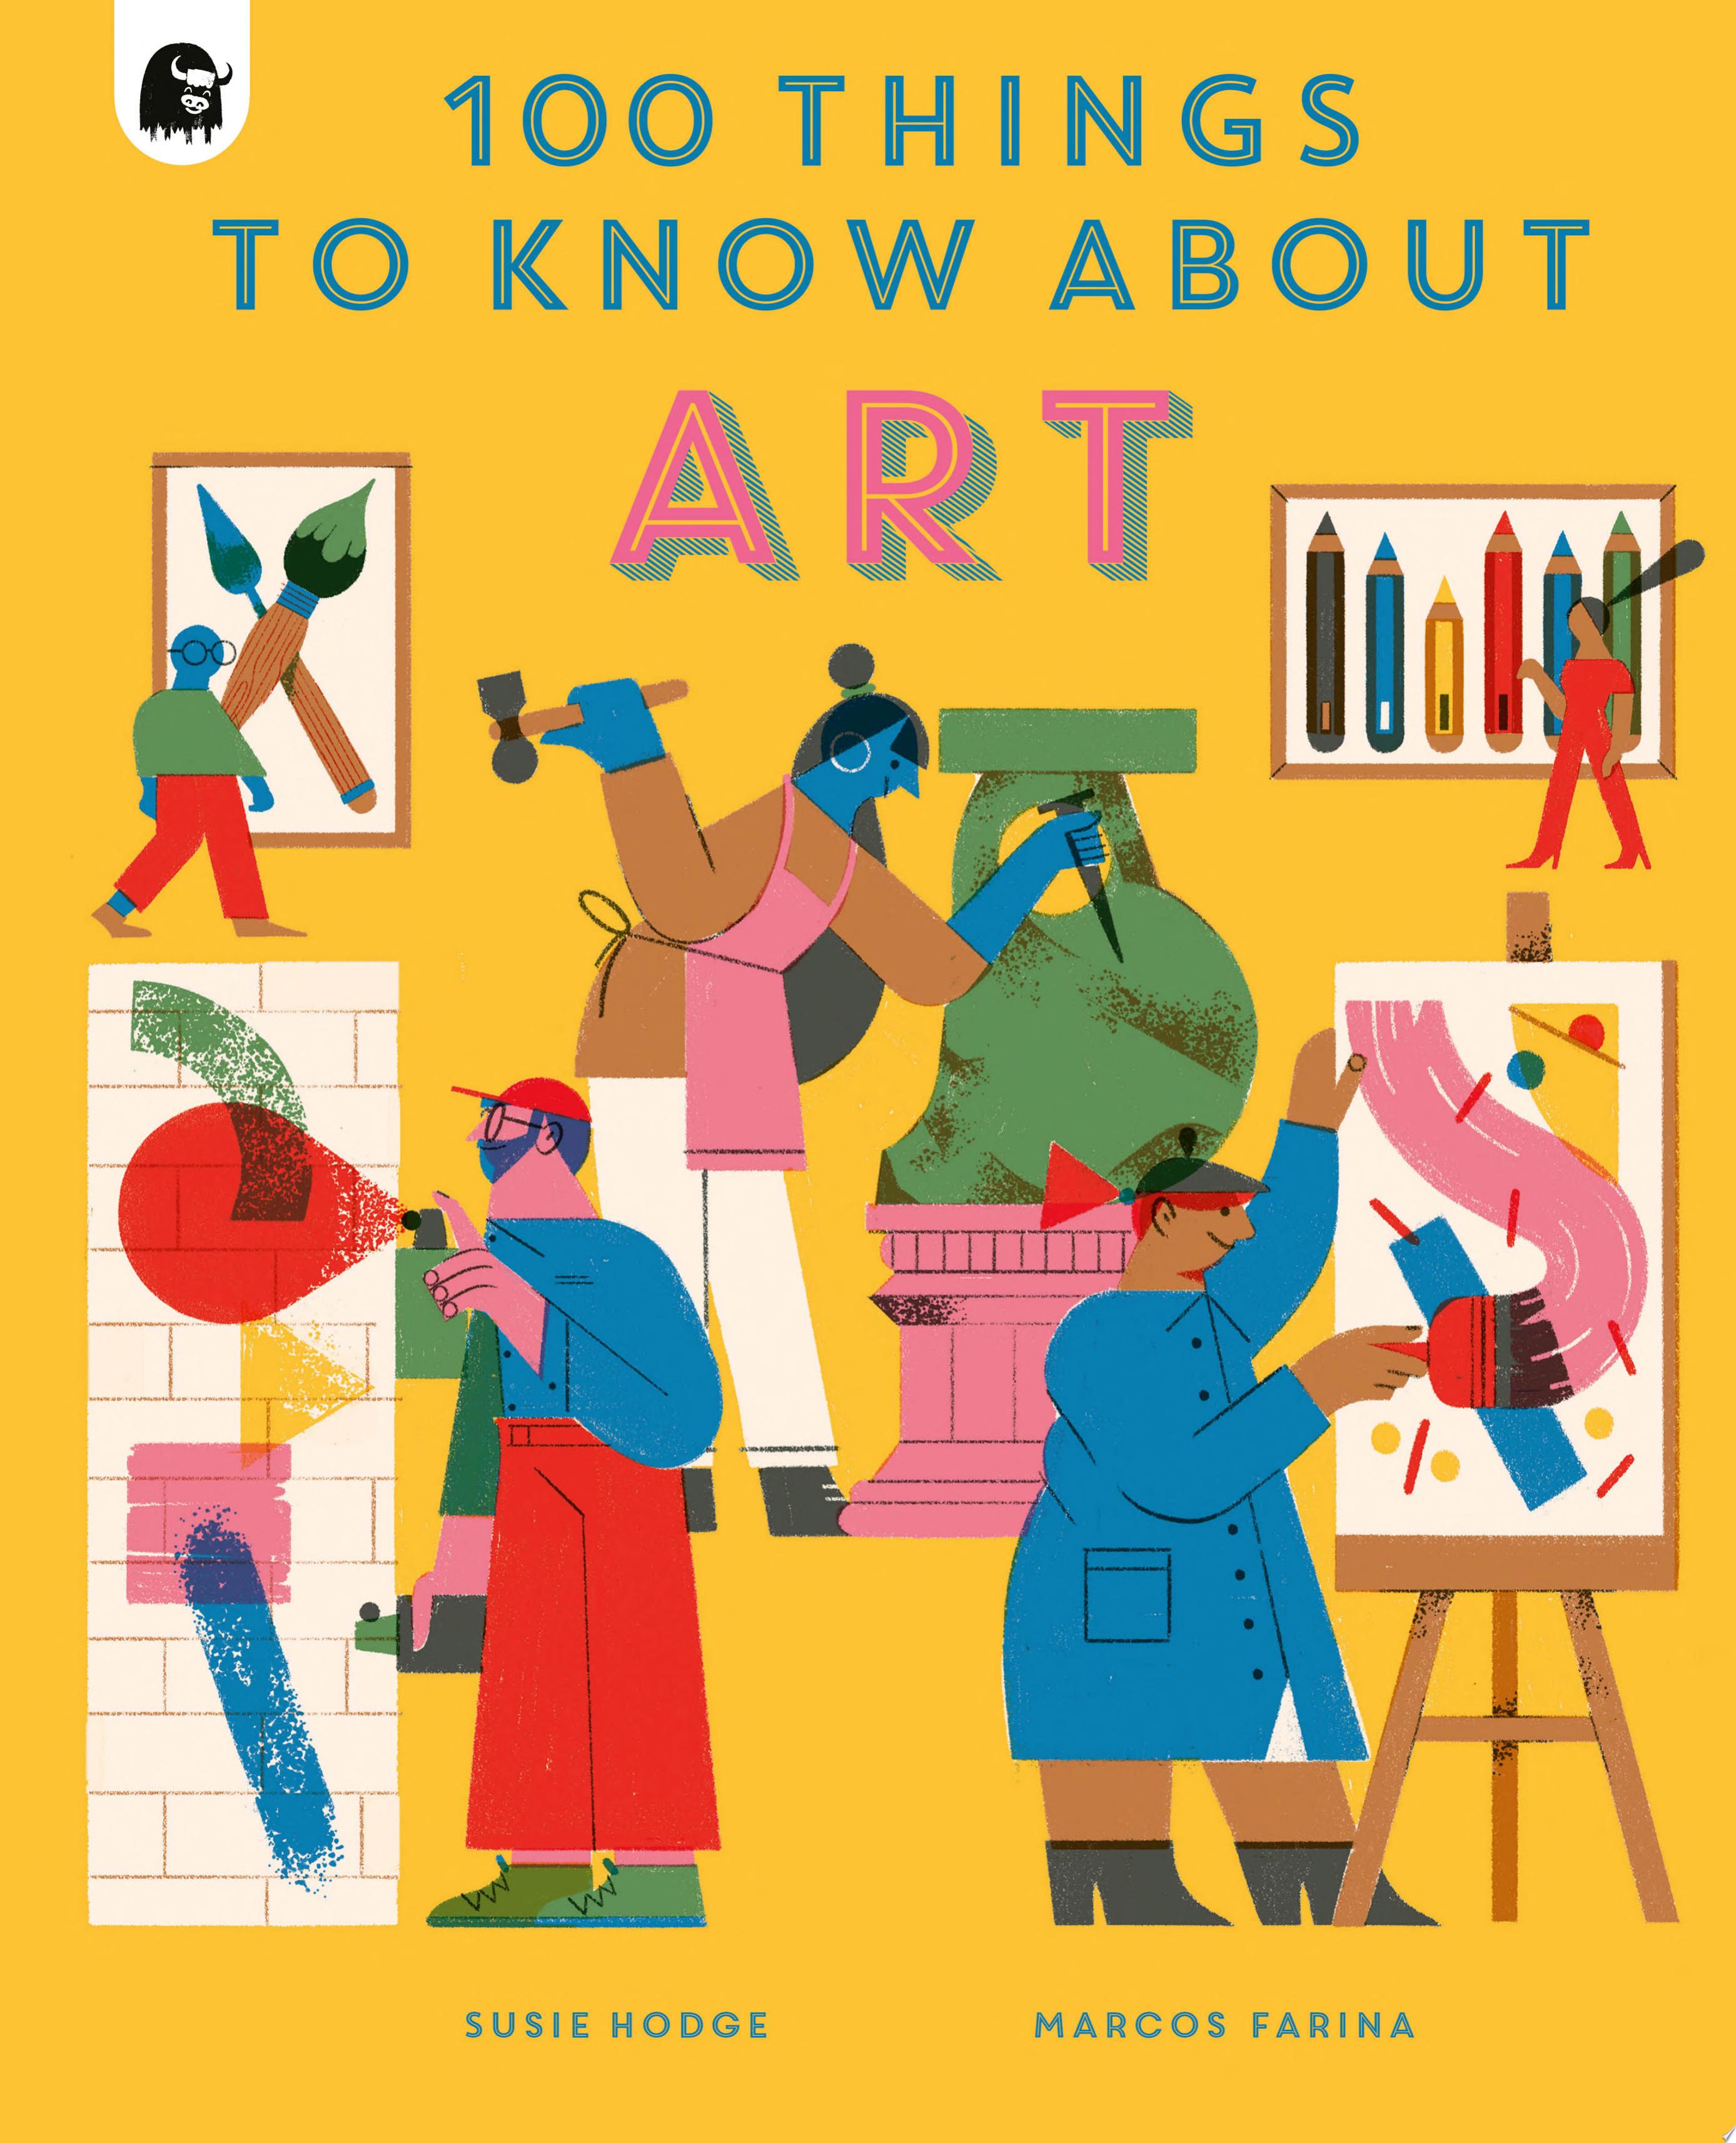 Image for "100 Things to Know About Art"